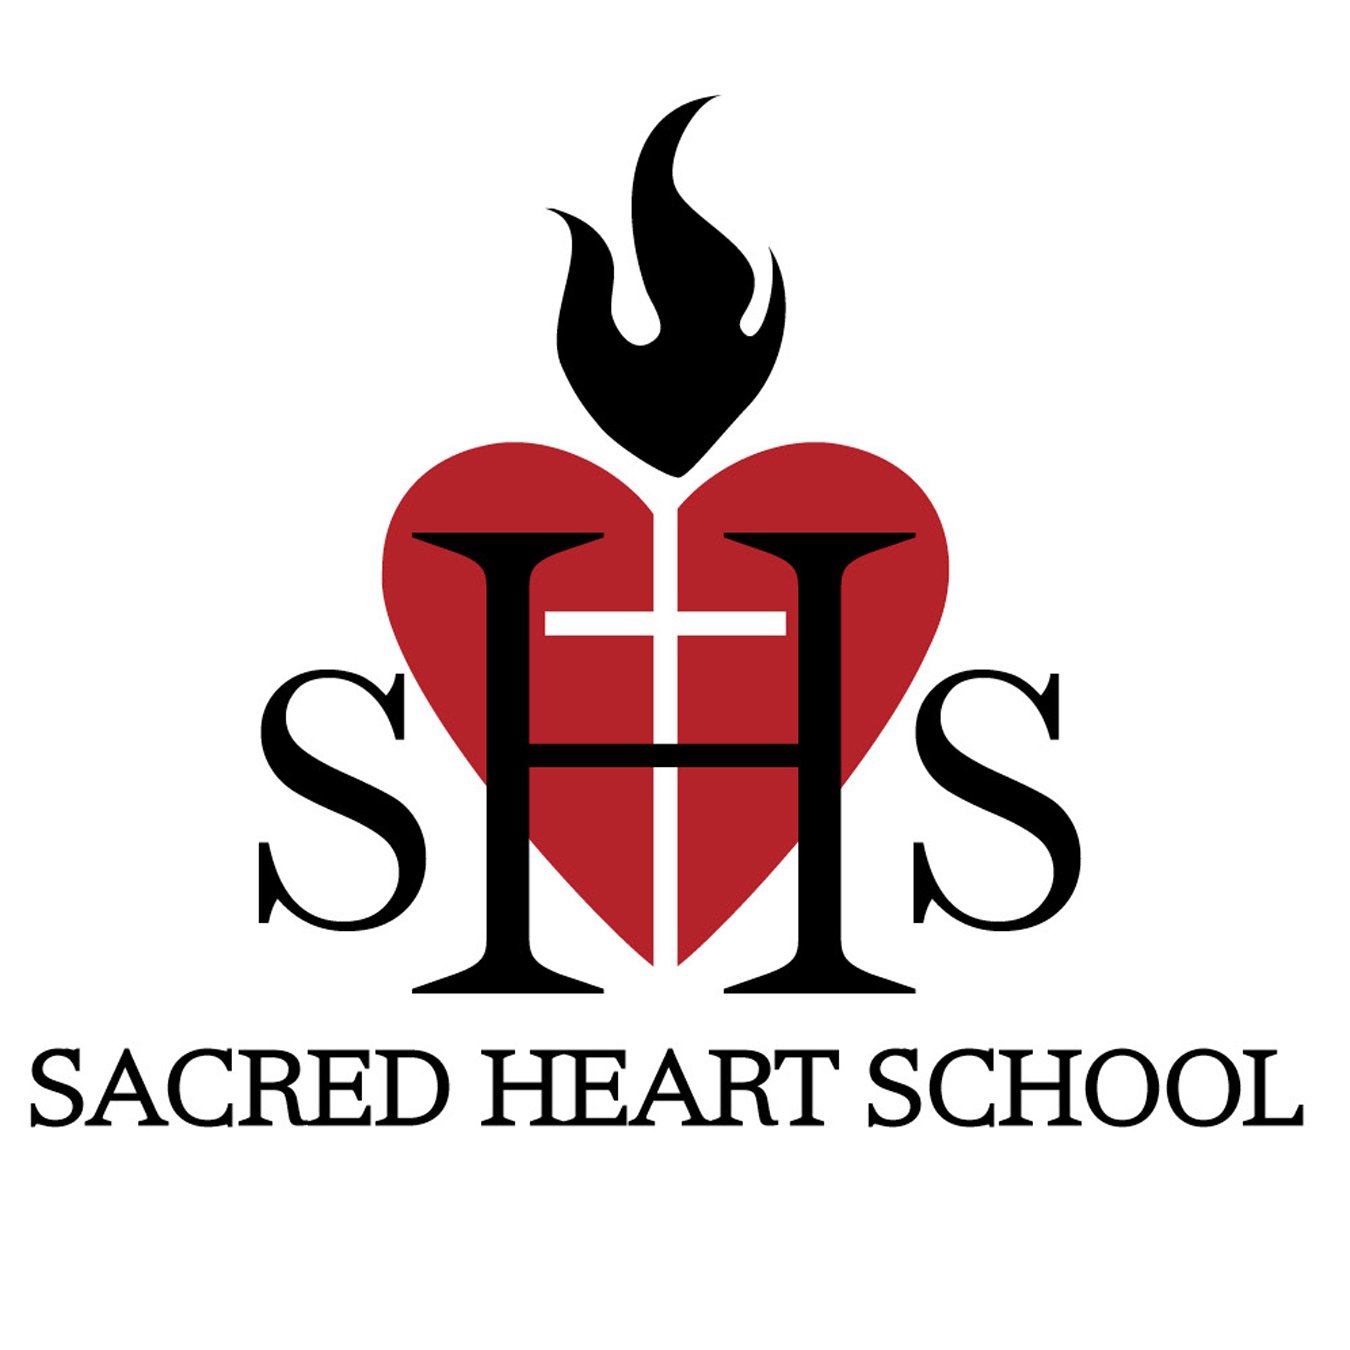 Sacred Heart School is a Middle States accredited Catholic school serving students in grades K though 8th. Children of all faiths are welcome.